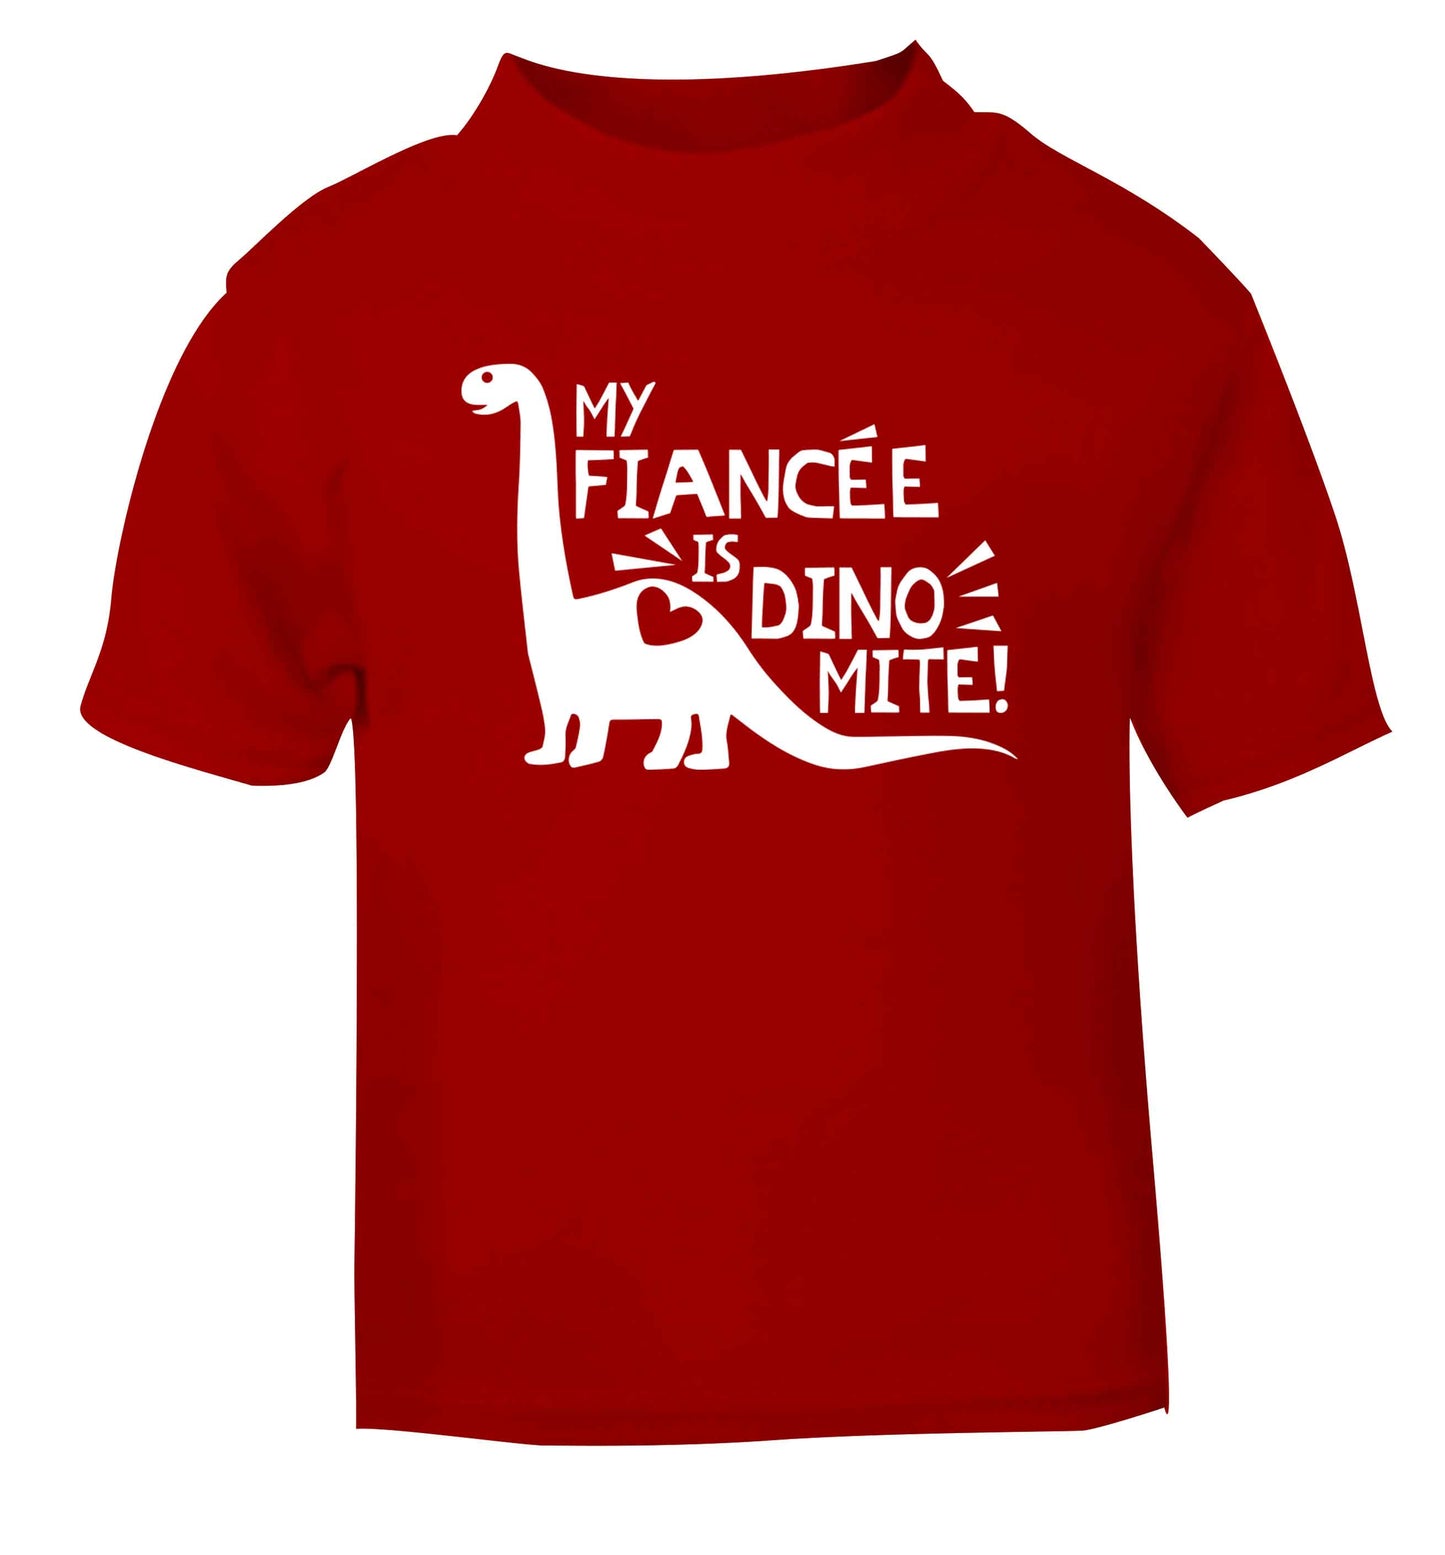 My fiancee is dinomite! red Baby Toddler Tshirt 2 Years